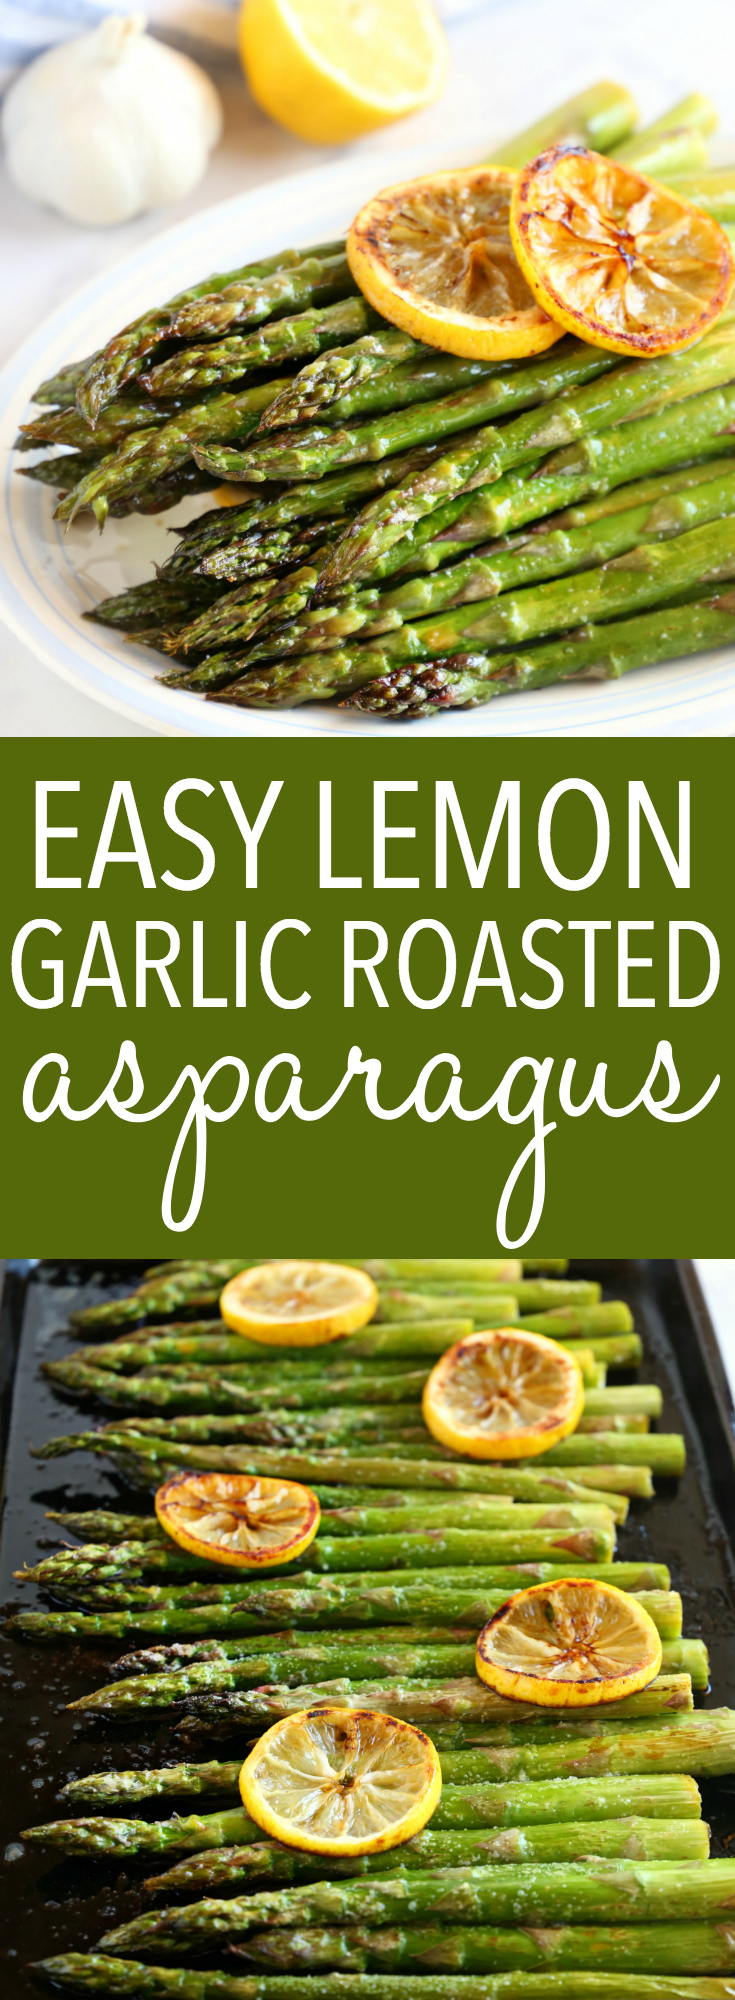 This Roasted Asparagus is a super easy and totally delicious side dish for spring and summer! Only a few ingredients and 15 minutes stand between you and this fresh, flavourful dish! Recipe from thebusybaker.ca! #asparagusrecipe #roastedasparagus #lemongarlicasparagus #easyasparagusrecipe #garlicasparagus via @busybakerblog